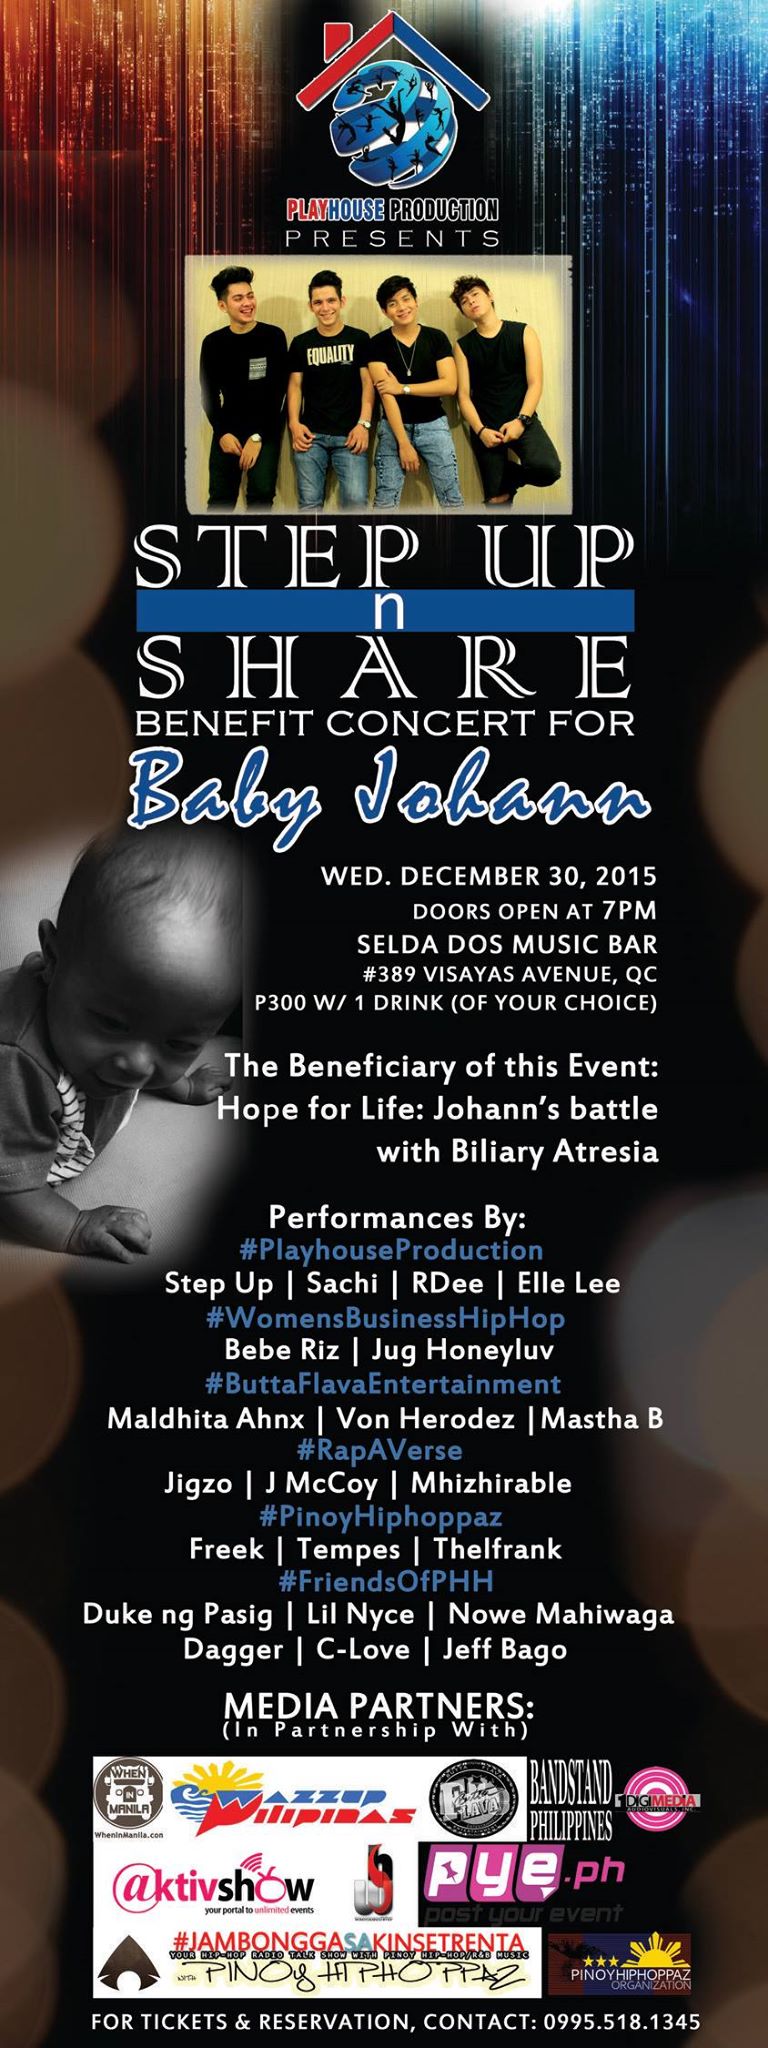 STEP UP n' SHARE: Benefit Concert for Baby Johann clock Wednesday, December 30 at 7 PM - 1 AM Dec 30 at 7 PM to Dec 31 at 1 AM pin Show Map Selda-Dos Visayas Avenue, Tandang Sora, Quezon City, Philippines Playhouse Production presents STEP UP n SHARE: Benefit Concert for Baby Johann December 30 (Wed), 7PM, Selda Dos Music Bar P300 with 1 drink of your choice Doors open at 7PM We are also open to event partnerships and direct donations. For inquiries and reservations, contact 09955181345. Artists: Sachi RDee Elle Lee Bebe Riz Jug HoneyLuv Rap-a-Verse Jigso and Jay McCoy ThelFrank Maldhita Ahnx Von Herodez Mastha B Playhouse Production Team: B+ Movement Ambassadors: Step Up Secretariat: RDee Asadon Musical Arranger/Host: Vanessa Villanueva Musical Director/Voice Coach: Jaypee Limarez Program Director: Michelle Ann Rio Executive Producer: Marissa Rio In partnership with Butta-Flava Entertainment JAMBONGGA WITH PINOY HIPHOPPAZ SA KINSE TRENTA (DZME1530) Women's Business Hip-Hop [WBH] The Beneficiary of this Event: Hope for Life: Johann's battle with Biliary Atresia B+ Shirts Fundraising for Liver Transplant (available on the day of the event): https://www.facebook.com/media/set/?set=a.1472083613096168.1073741836.1449322748705588 Media Partners: WhenInManila.com Wazzup Pilipinas Bandstand Philippines AKTIVshow